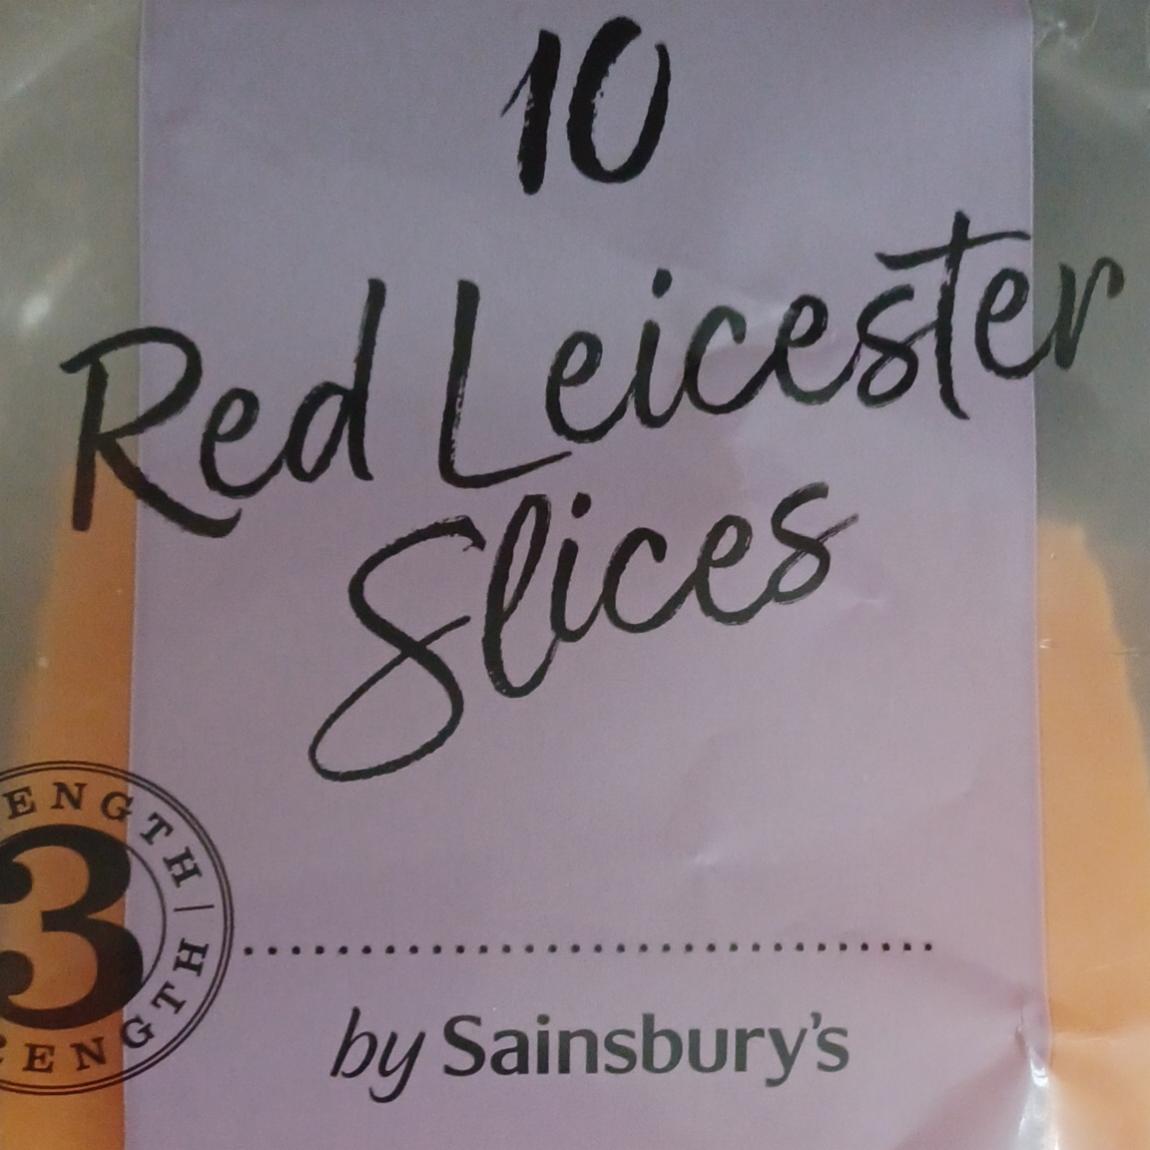 Fotografie - Red Leicester Slices by Sainsbury's